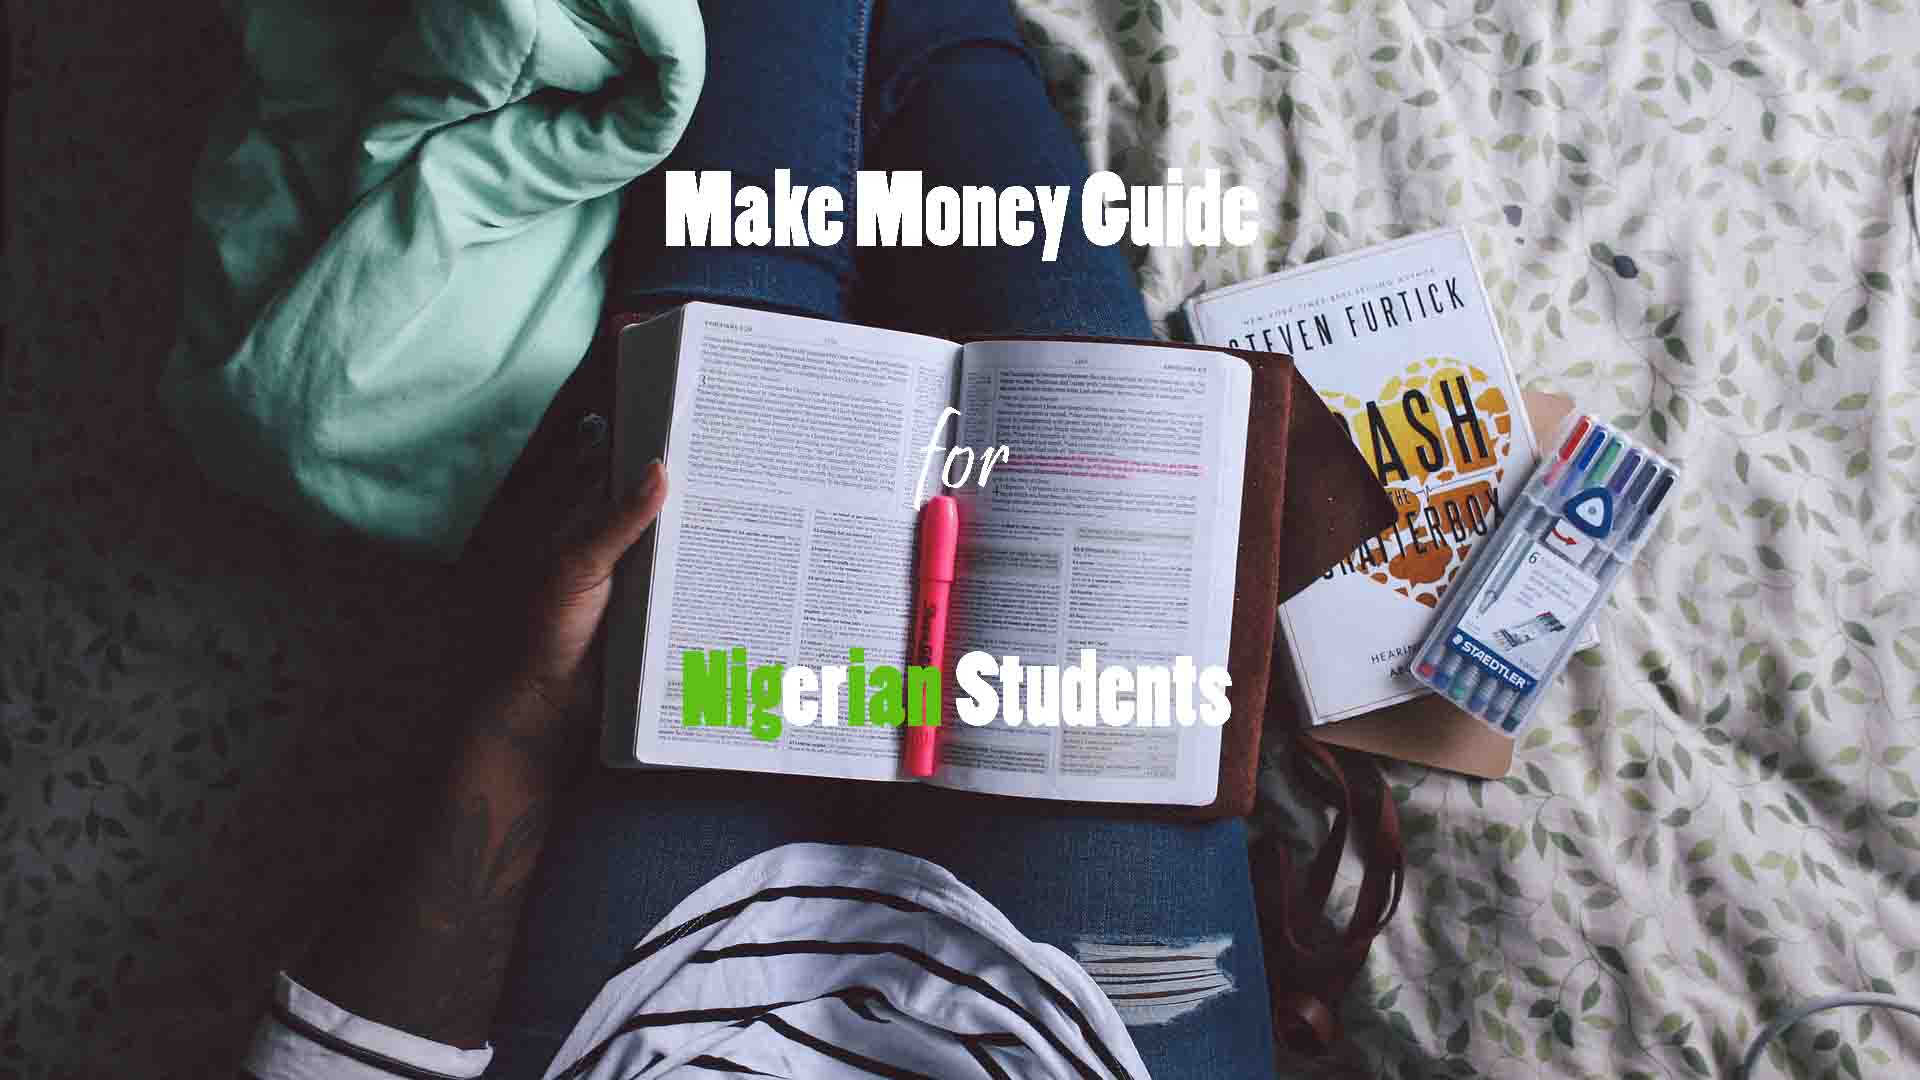 Make money guide for Nigerian students